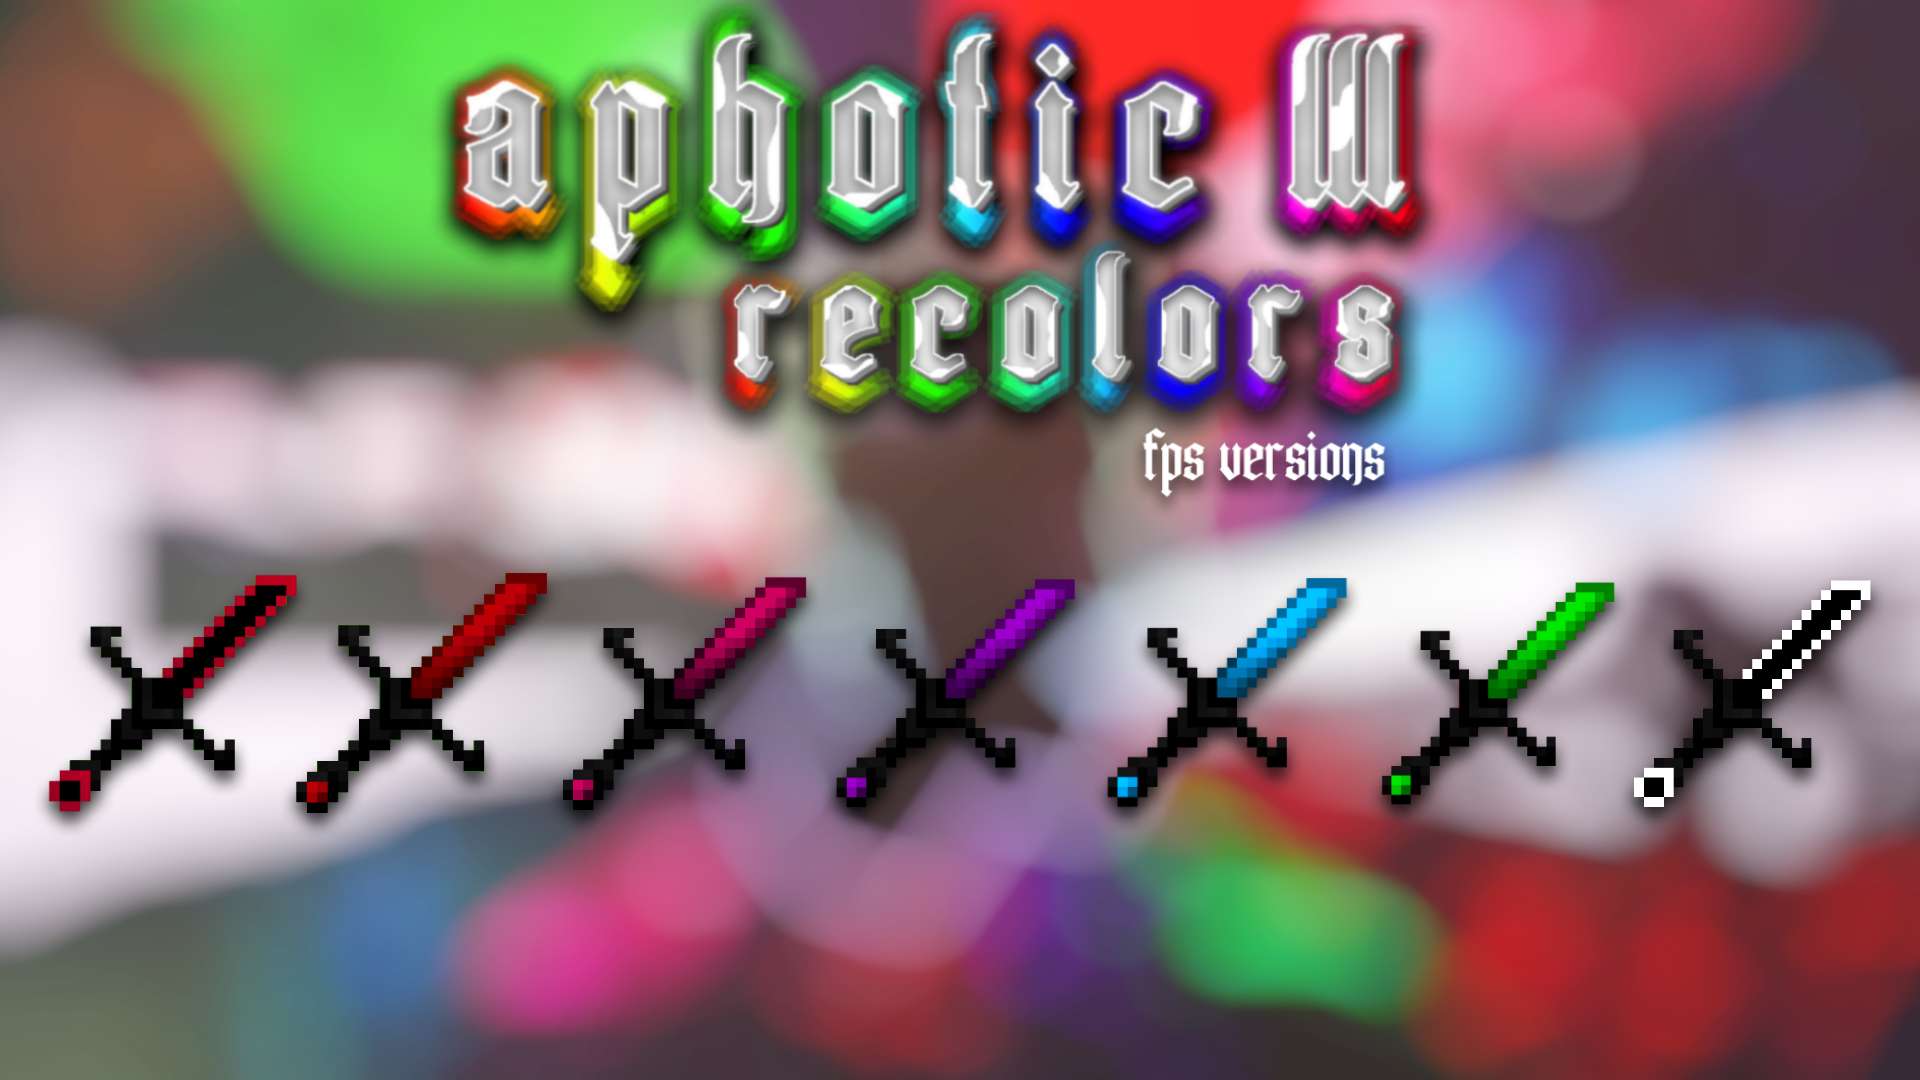 Gallery Image 1 for Aphotic III - FPS versions on vVPRP